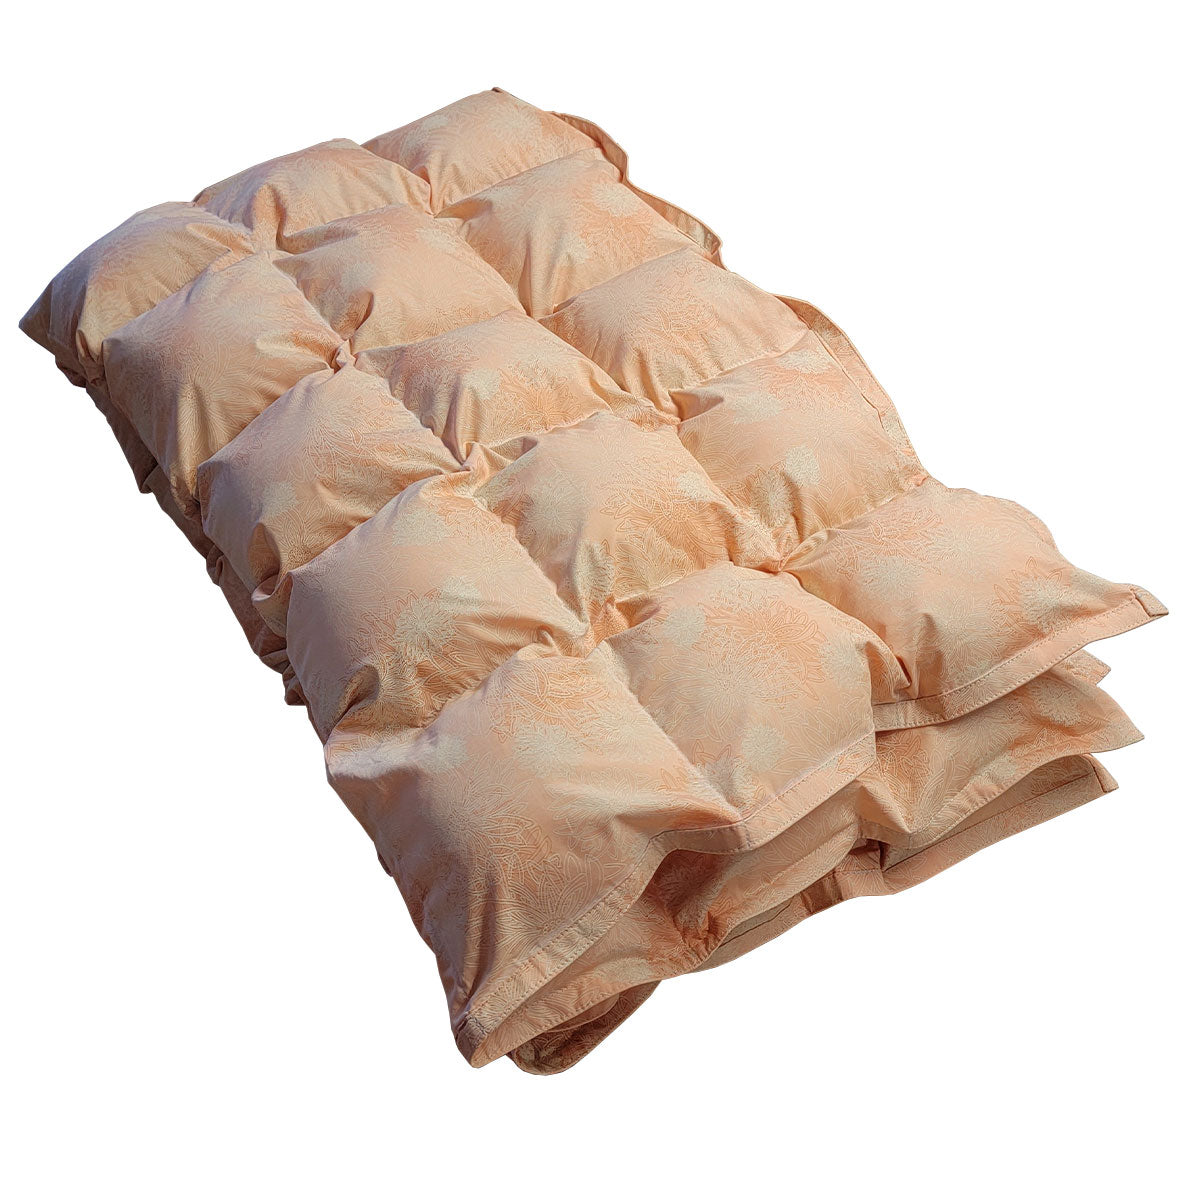 Weighted Blanket - Floral Peach